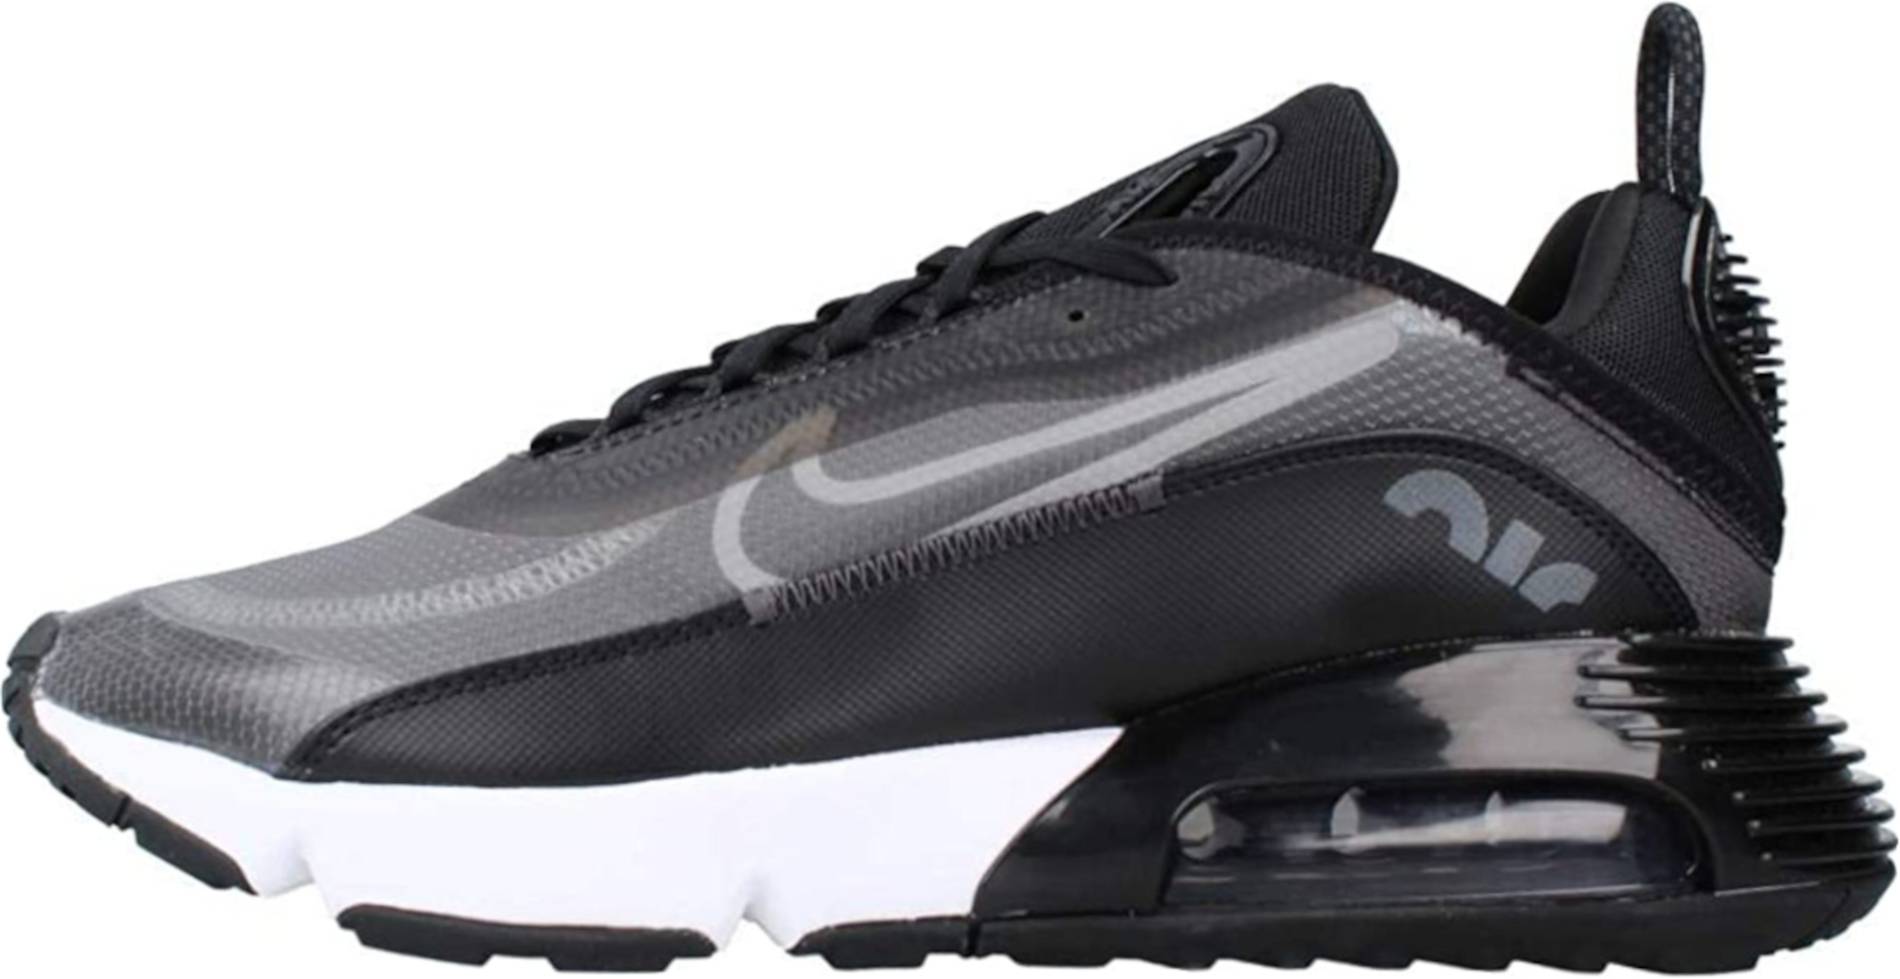 Stimulans Vroegst Overgave Nike Air Max 2090 sneakers in 30+ colors (only $70) | RunRepeat